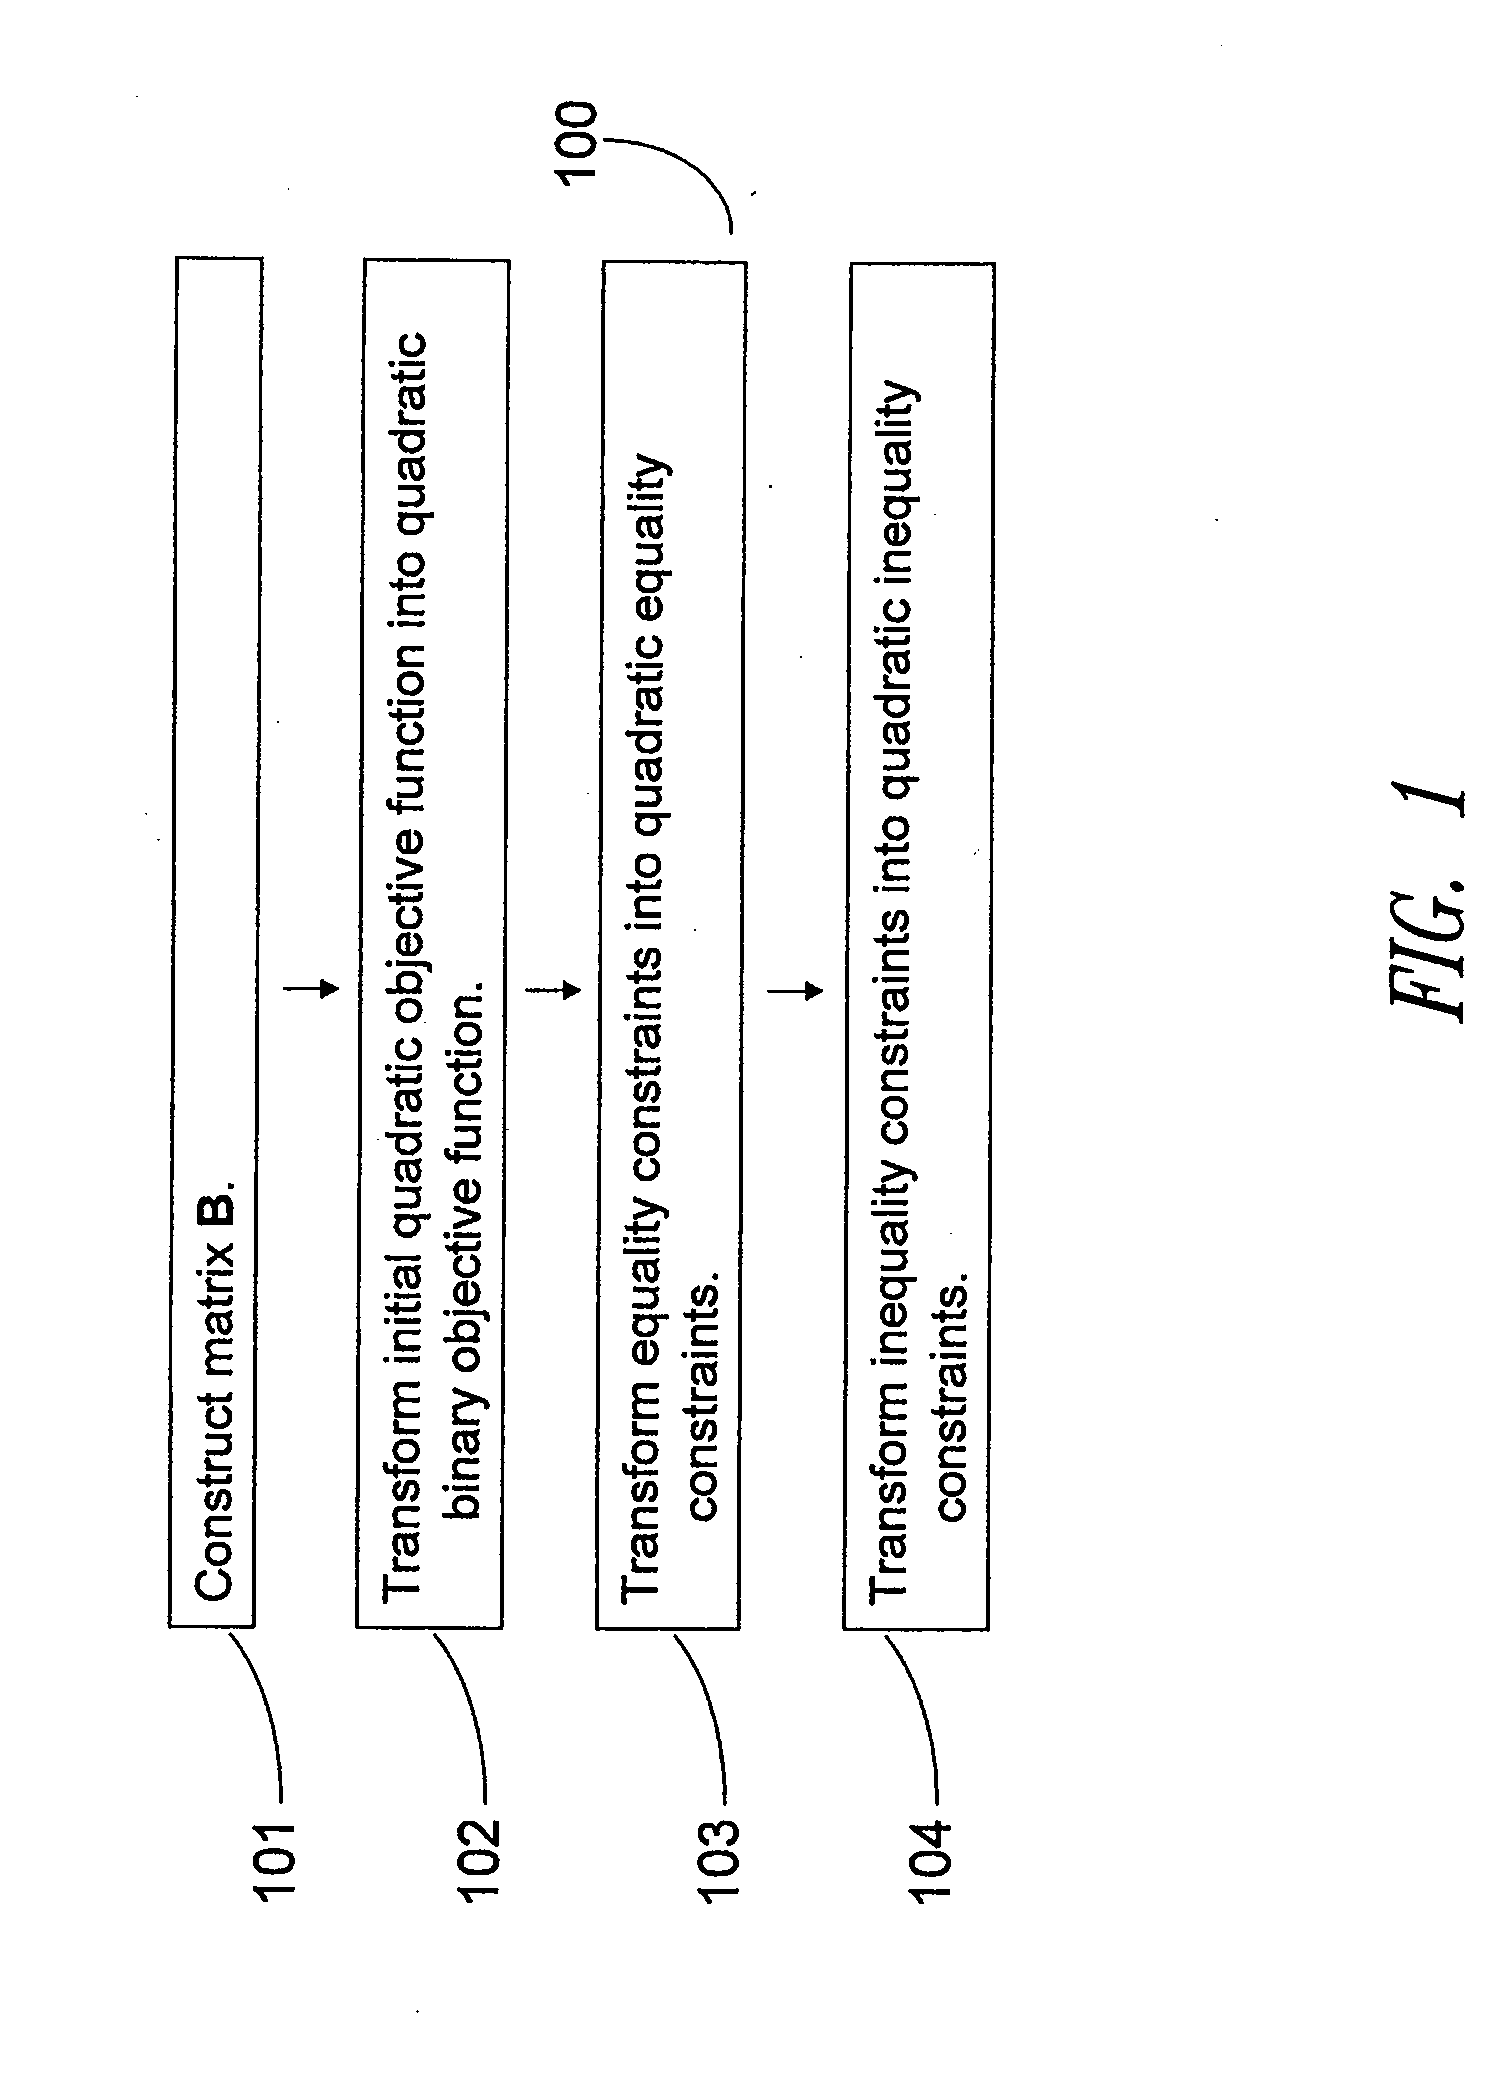 Method and system for solving integer programming and discrete optimization problems using analog processors